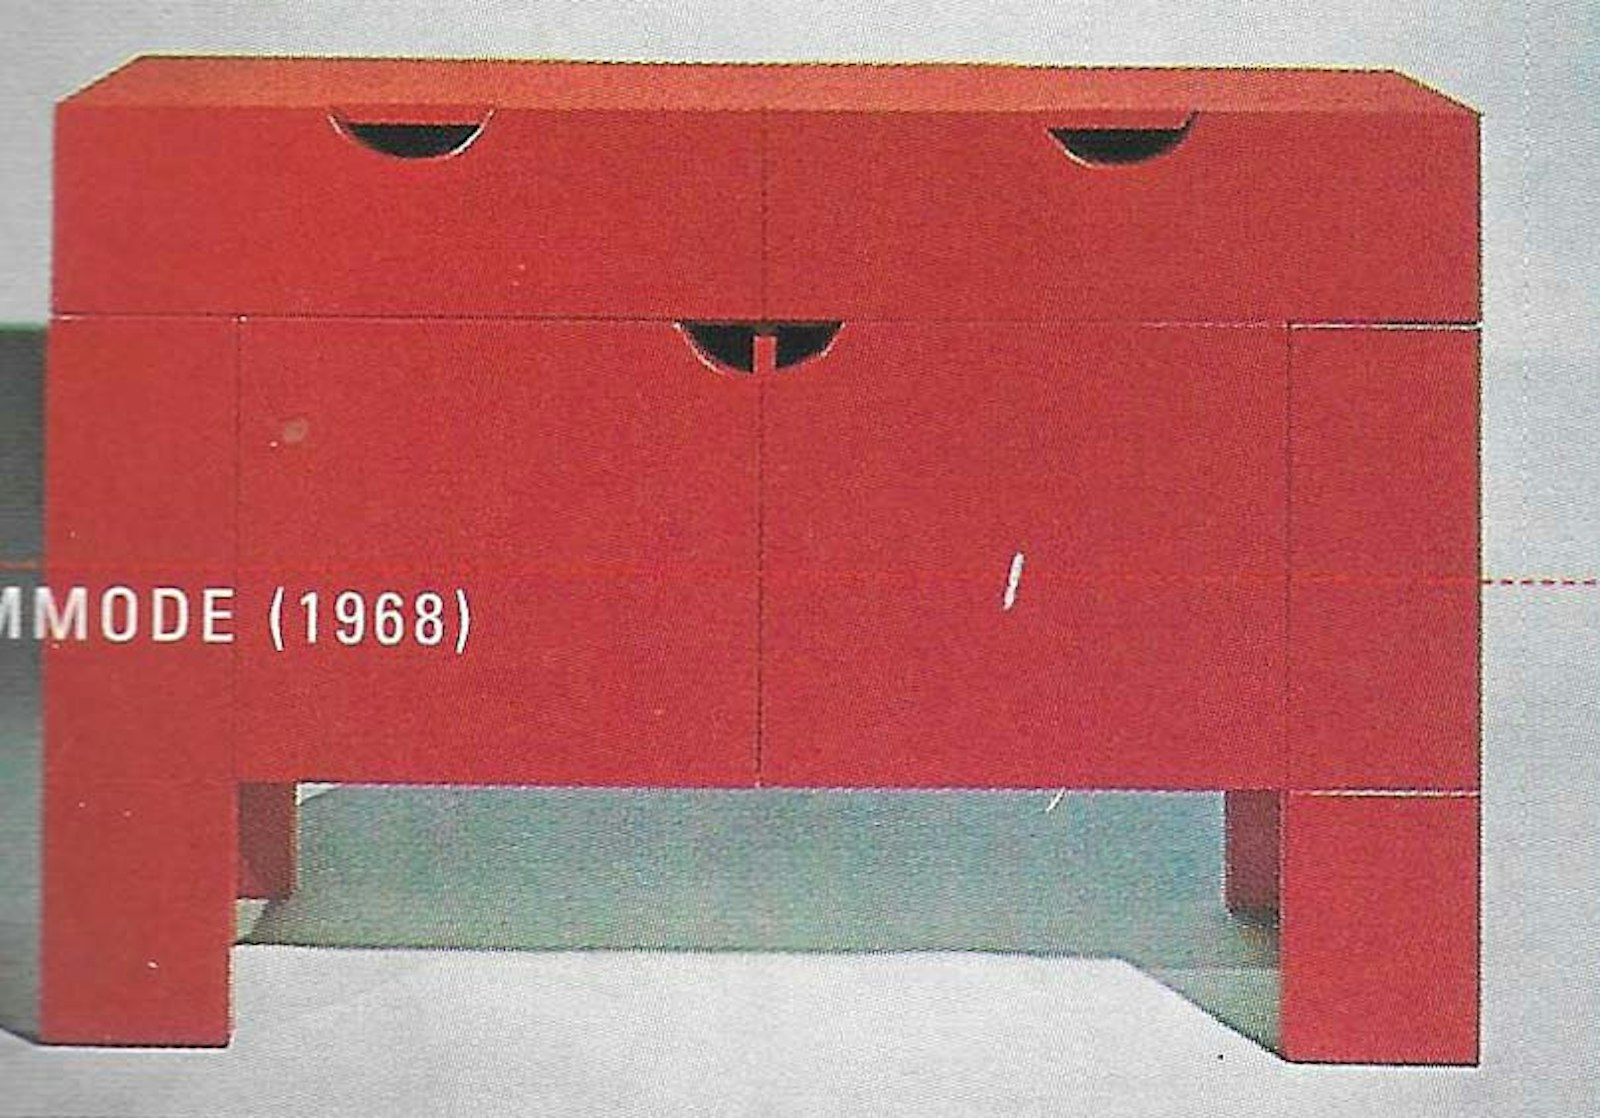 'Commode' (1968)